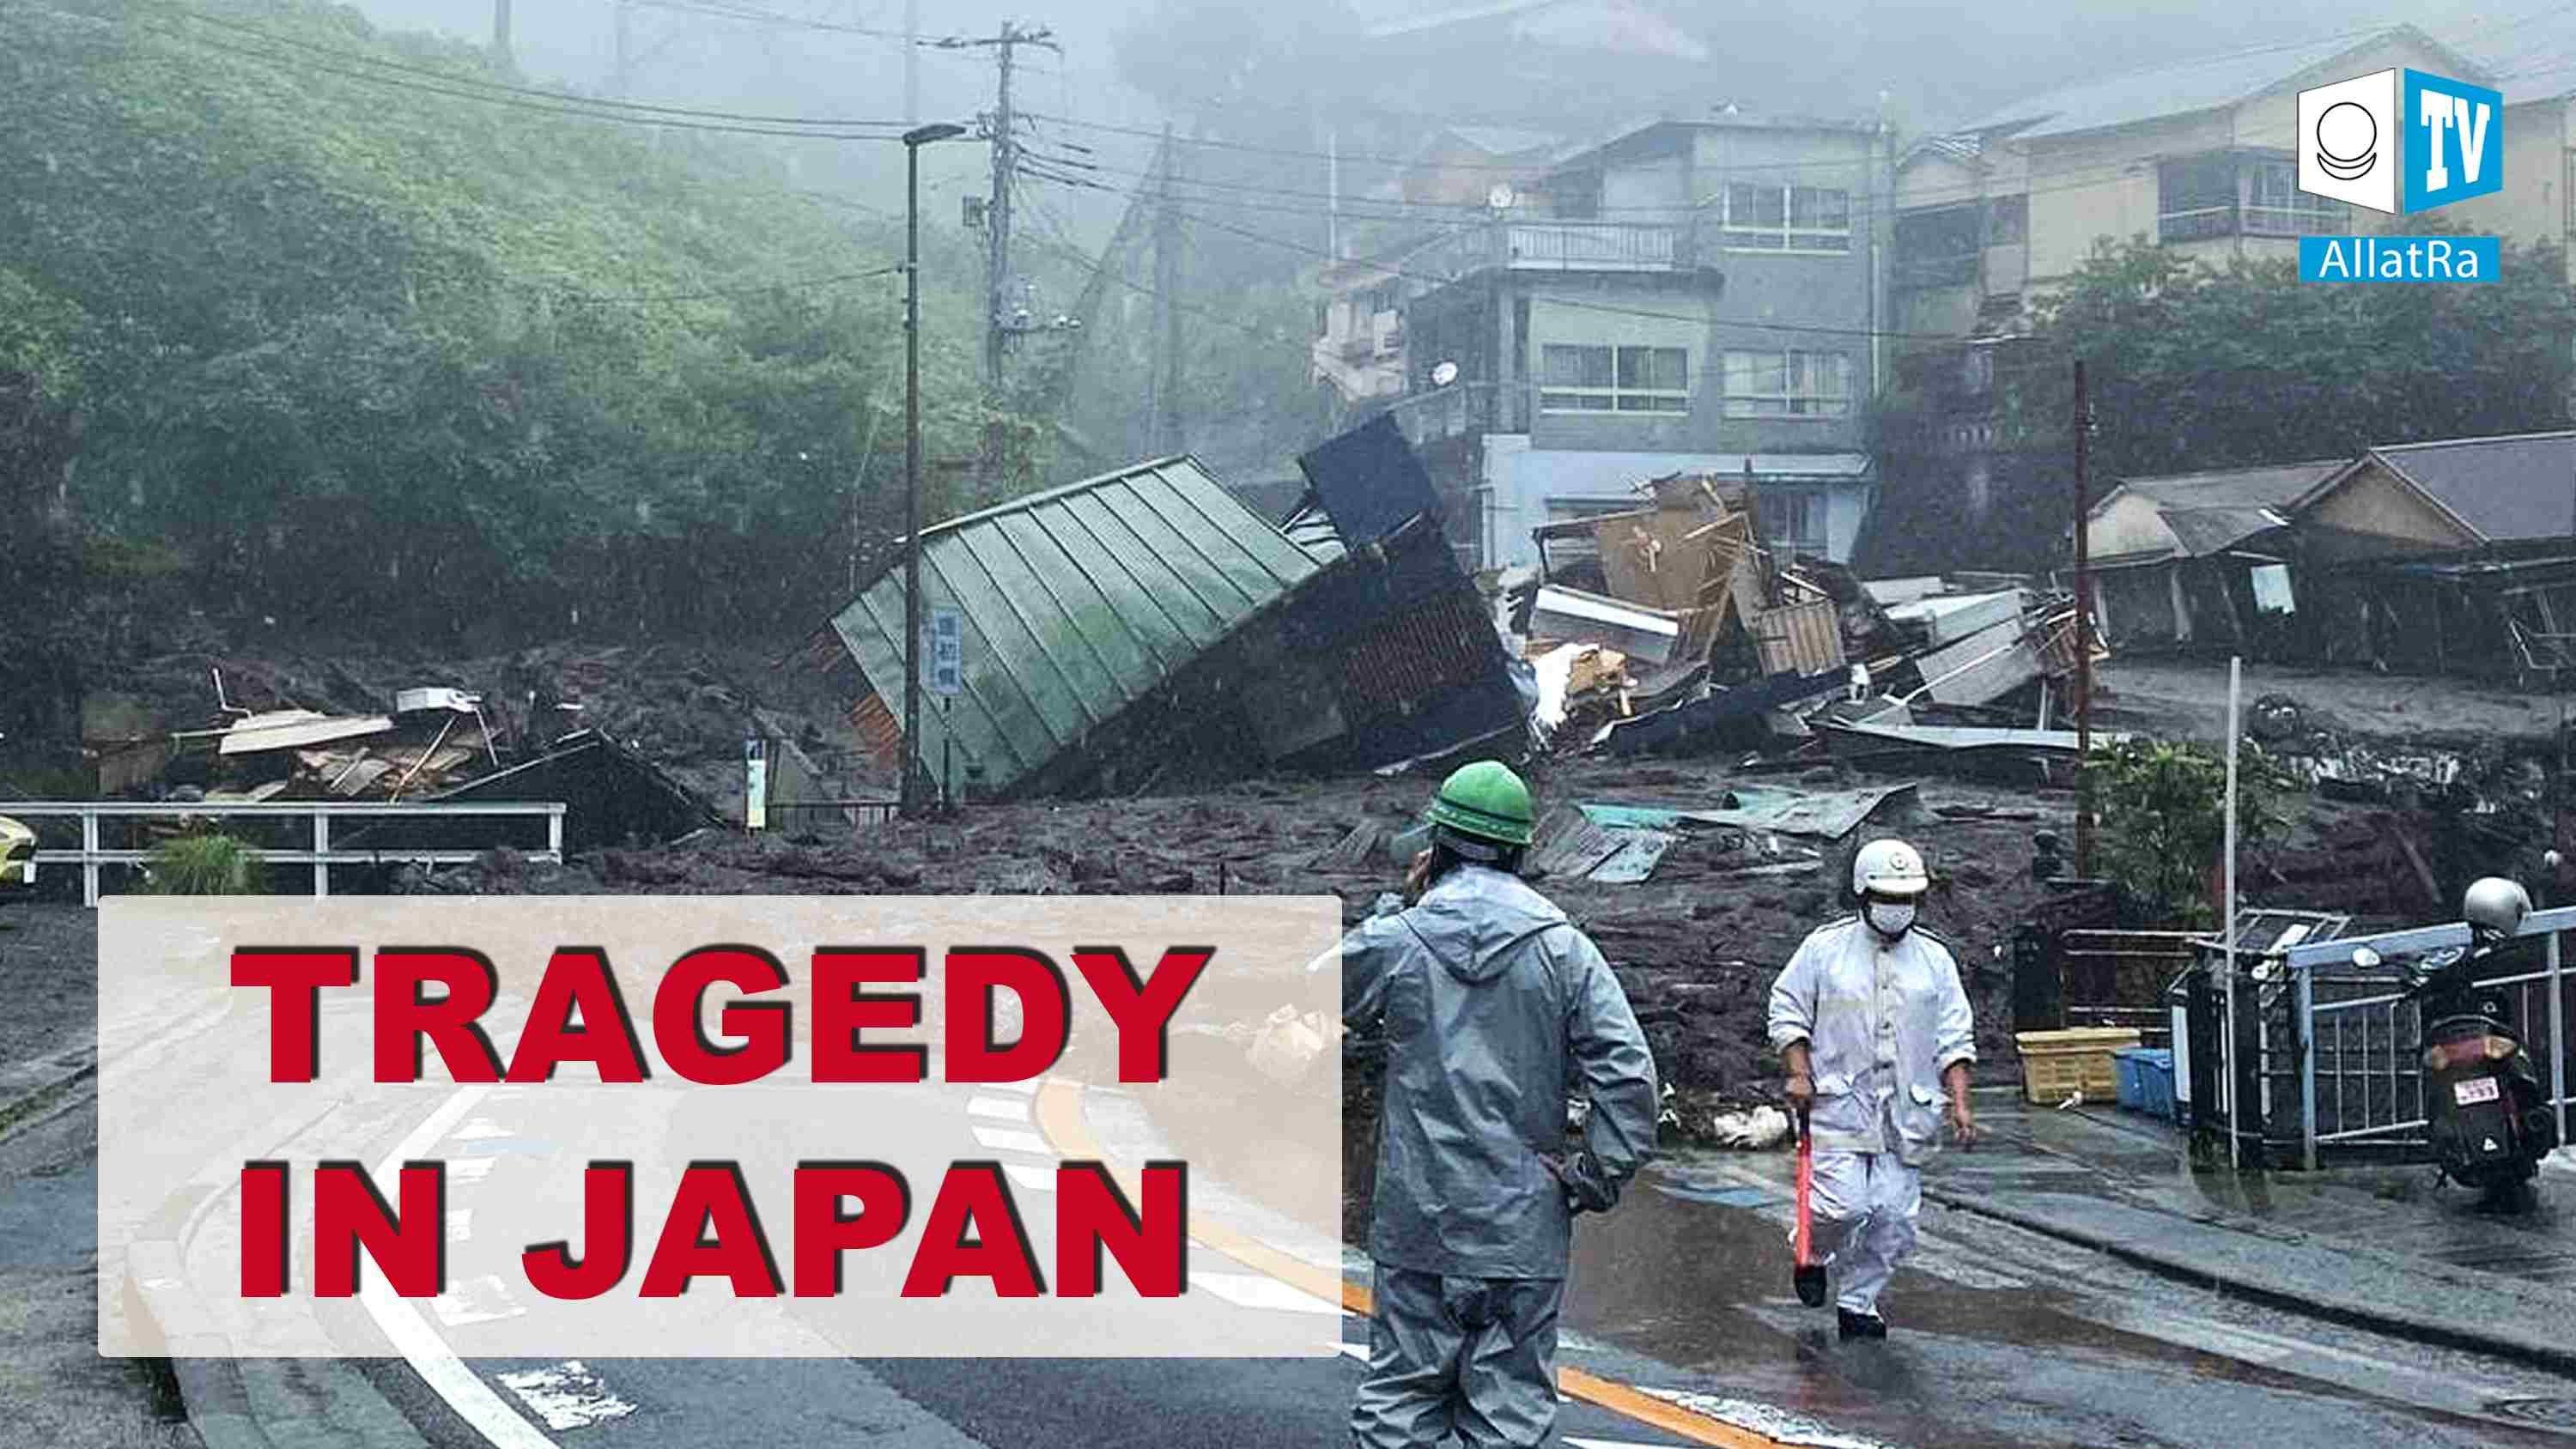 MORE than 1,000,000 victims in China. A devastating landslide in Japan. The global climate crisis